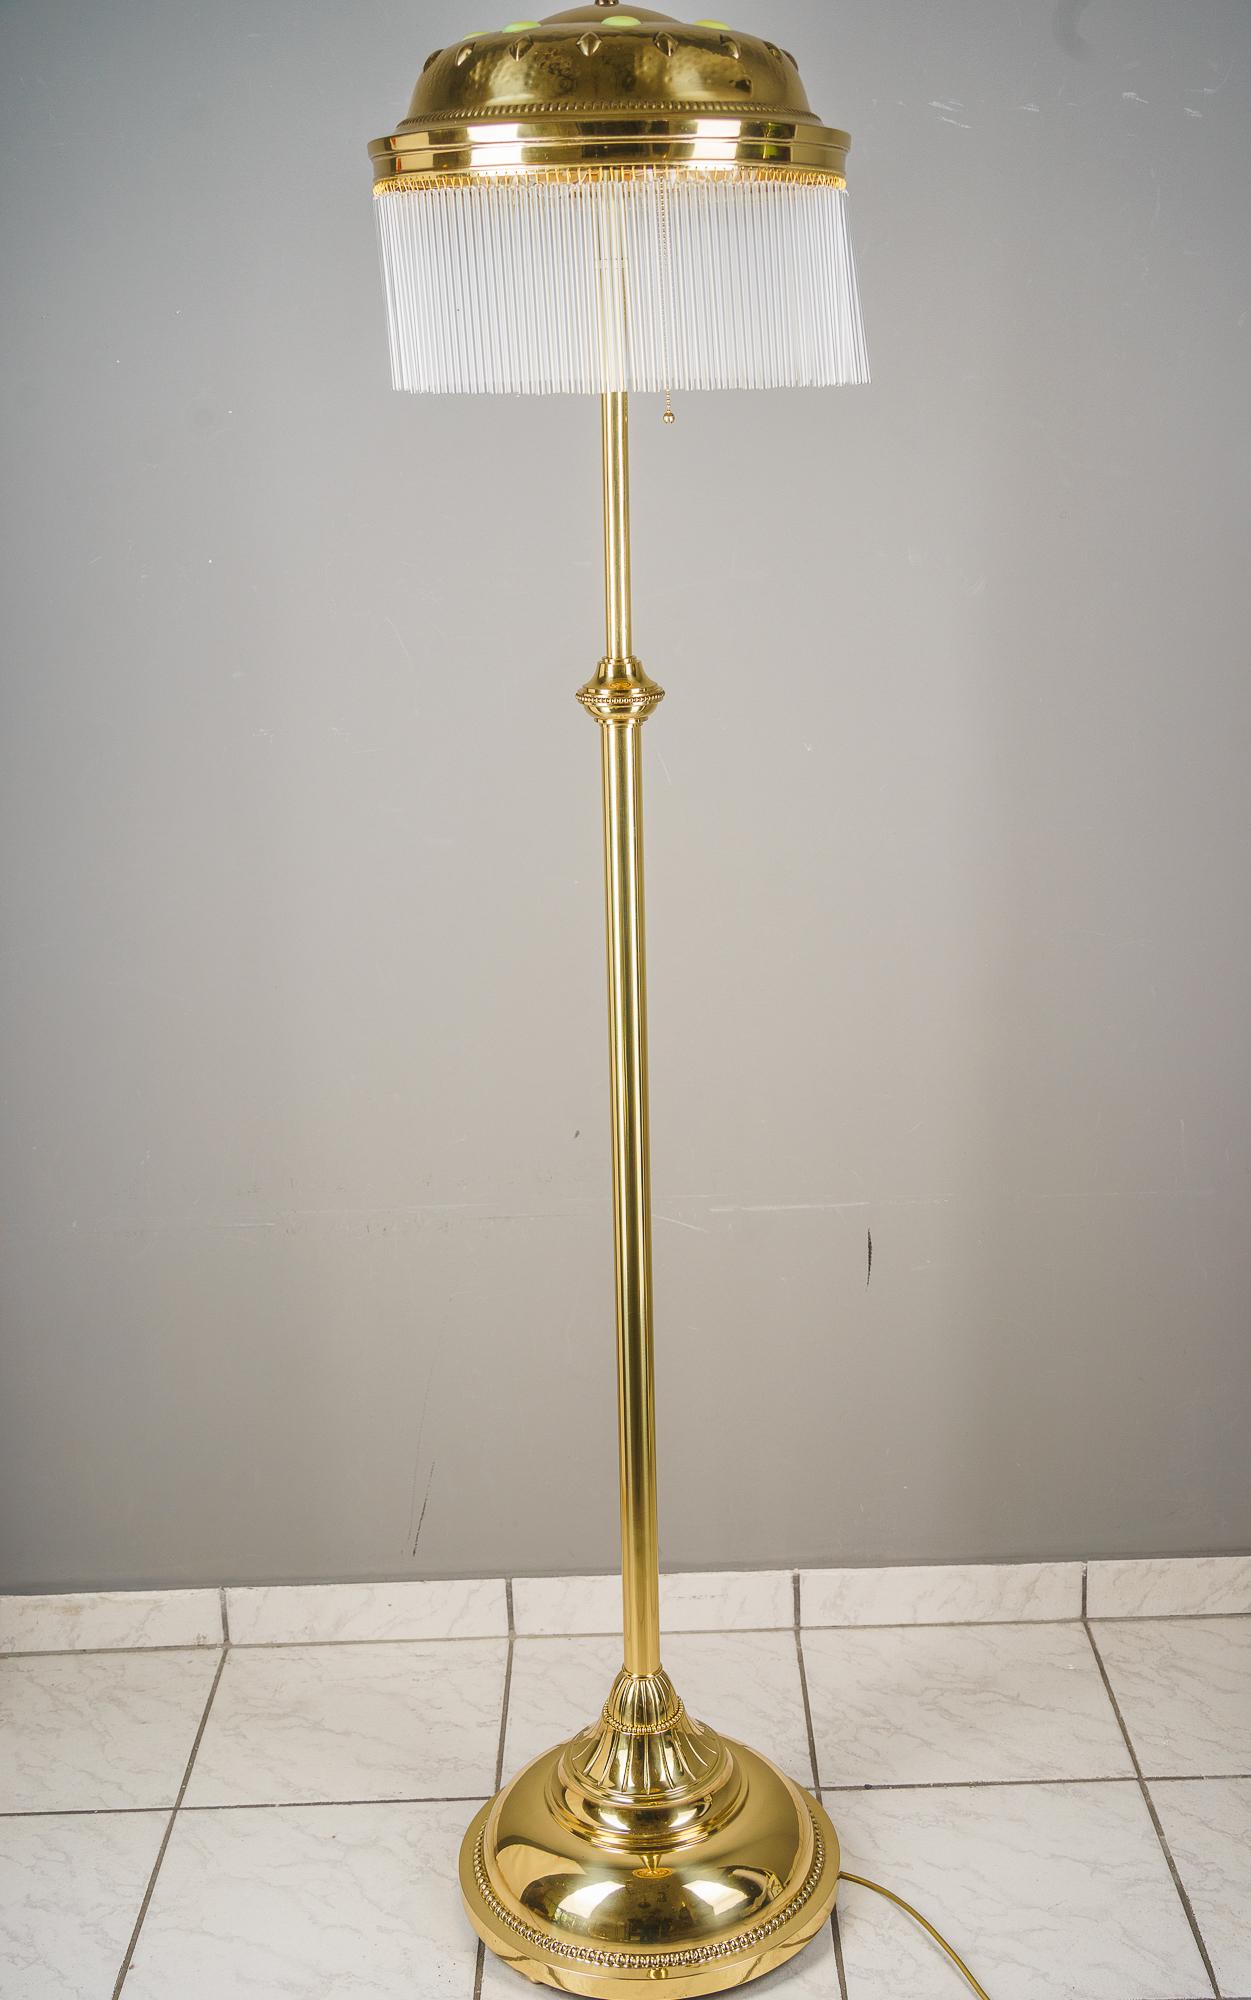 The hight is adjustable from 141cm up to 175cm
Brass polished and stove enameled
Original opaline glass stones on the shade
The glass sticks are replaced ( new )
